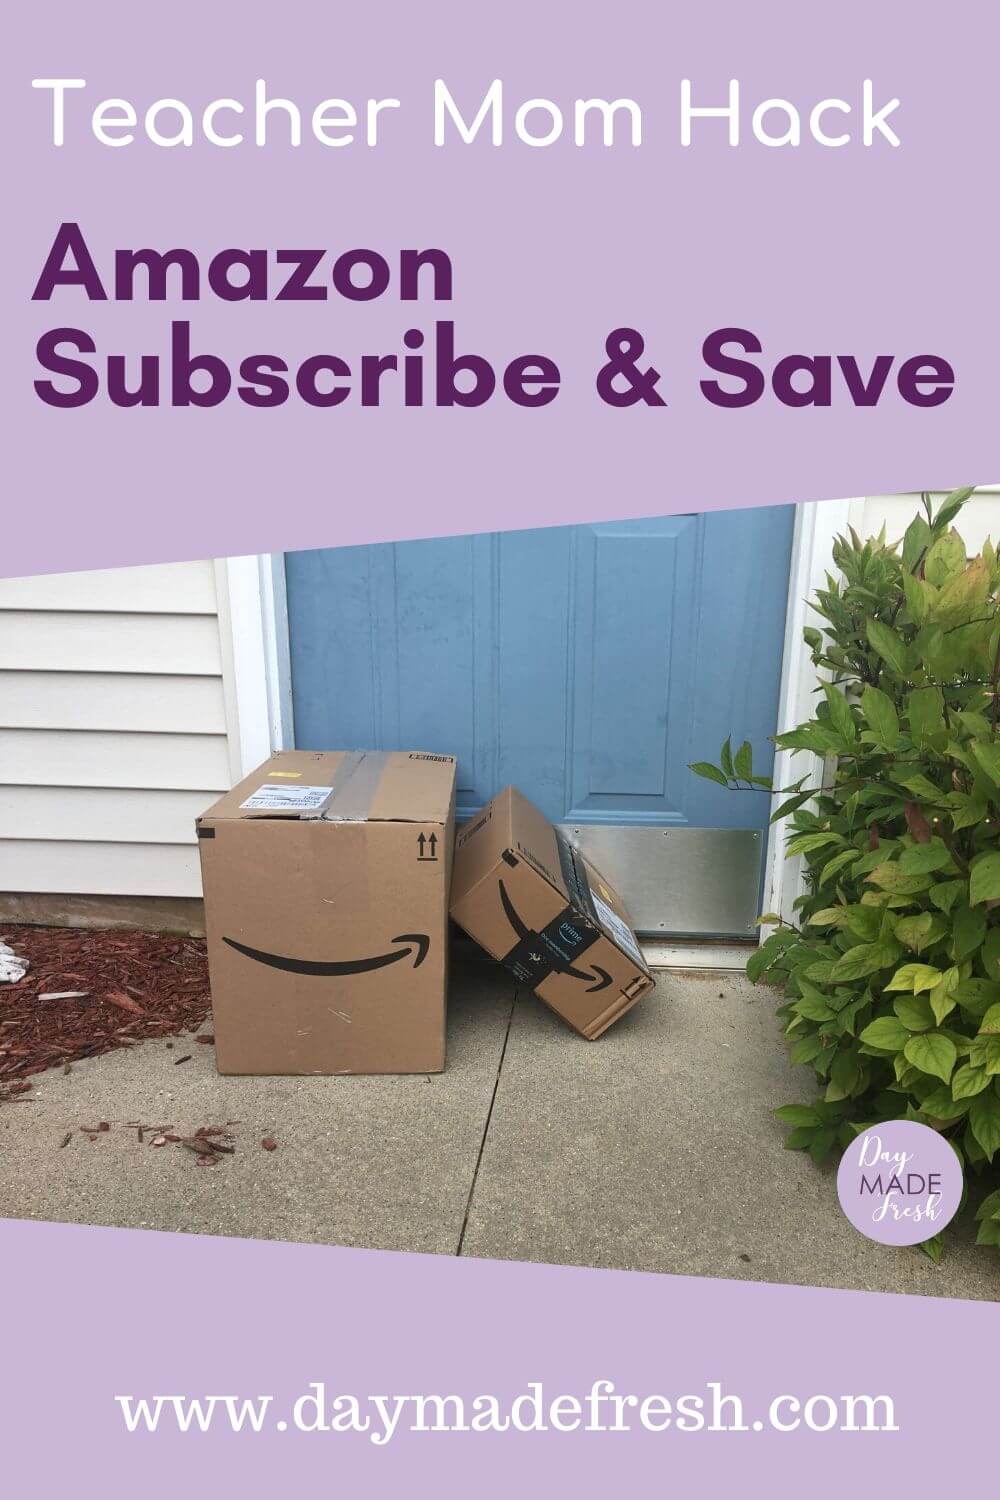 Teacher Mom Hack Amazon Subscribe & Save- Amazon Prime Subscribe and Save boxes